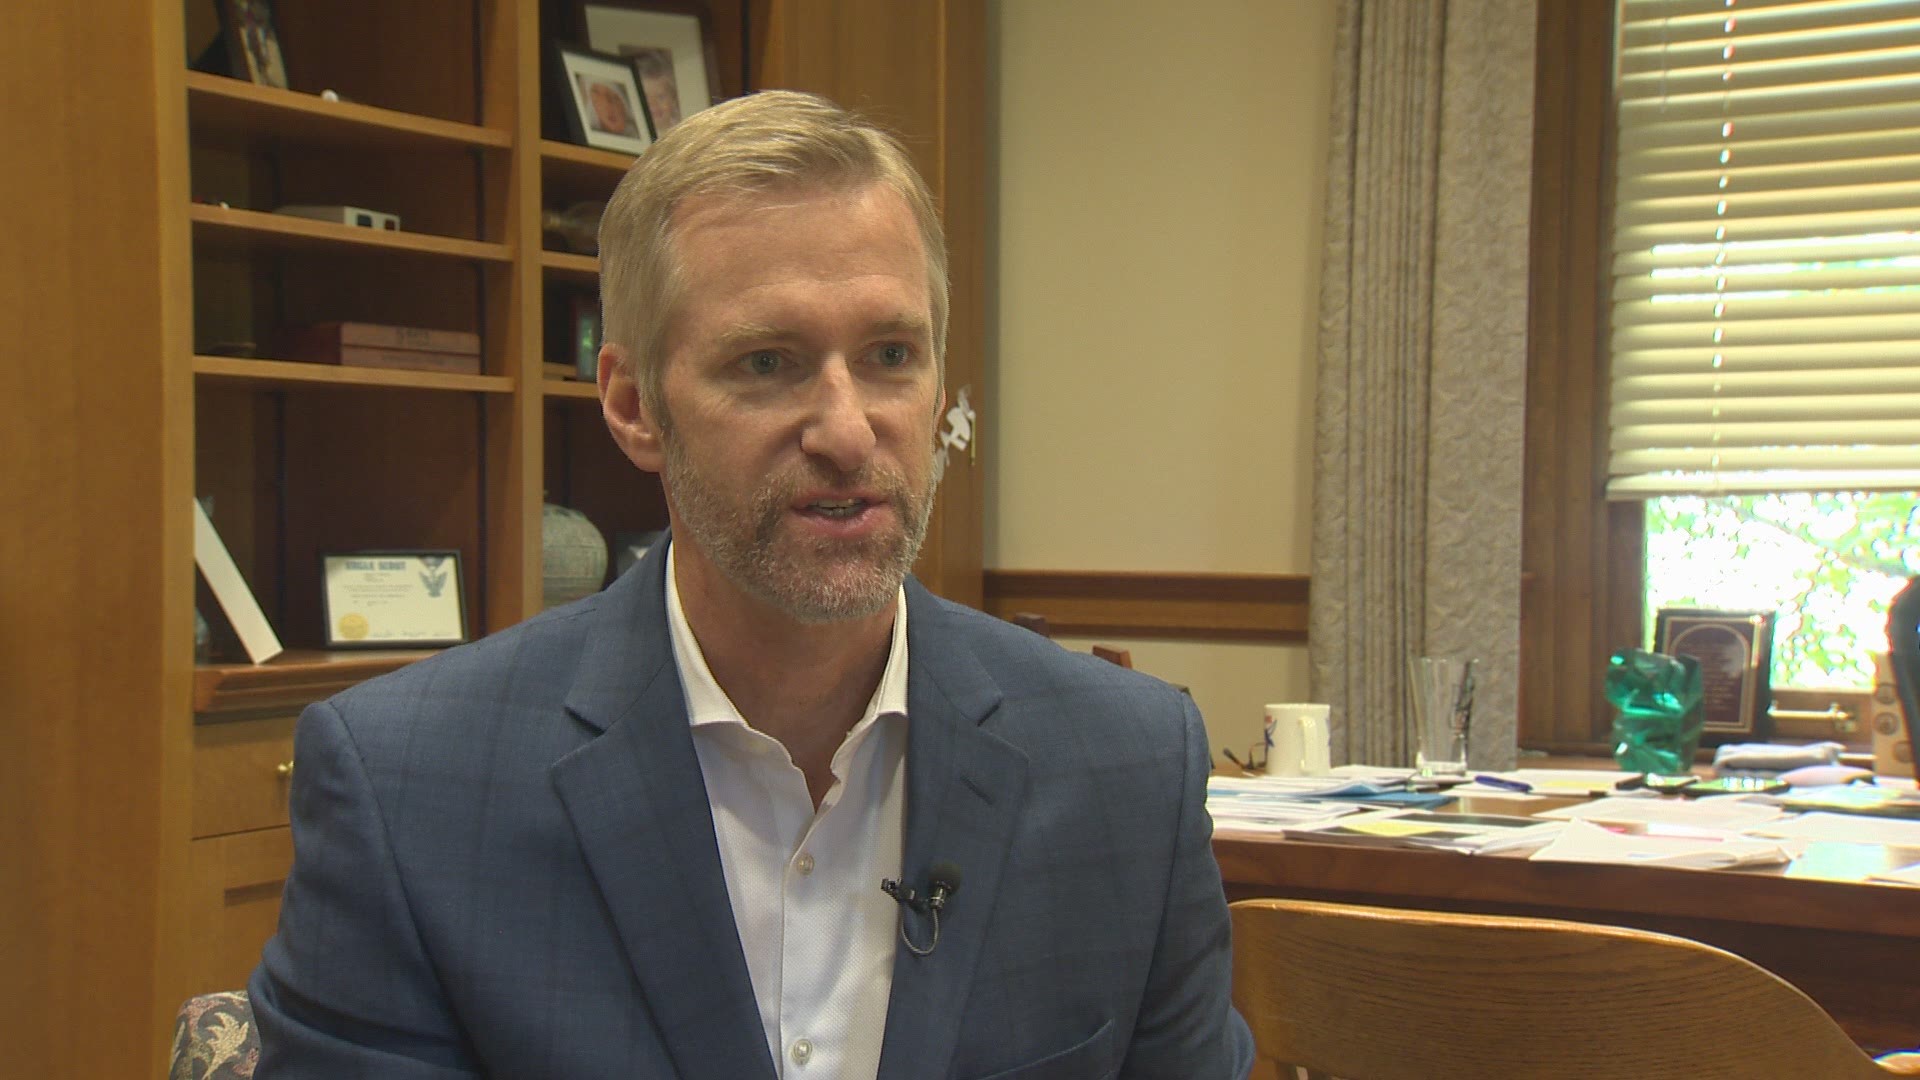 Mayor Wheeler supports investigation into police interactions with homeless